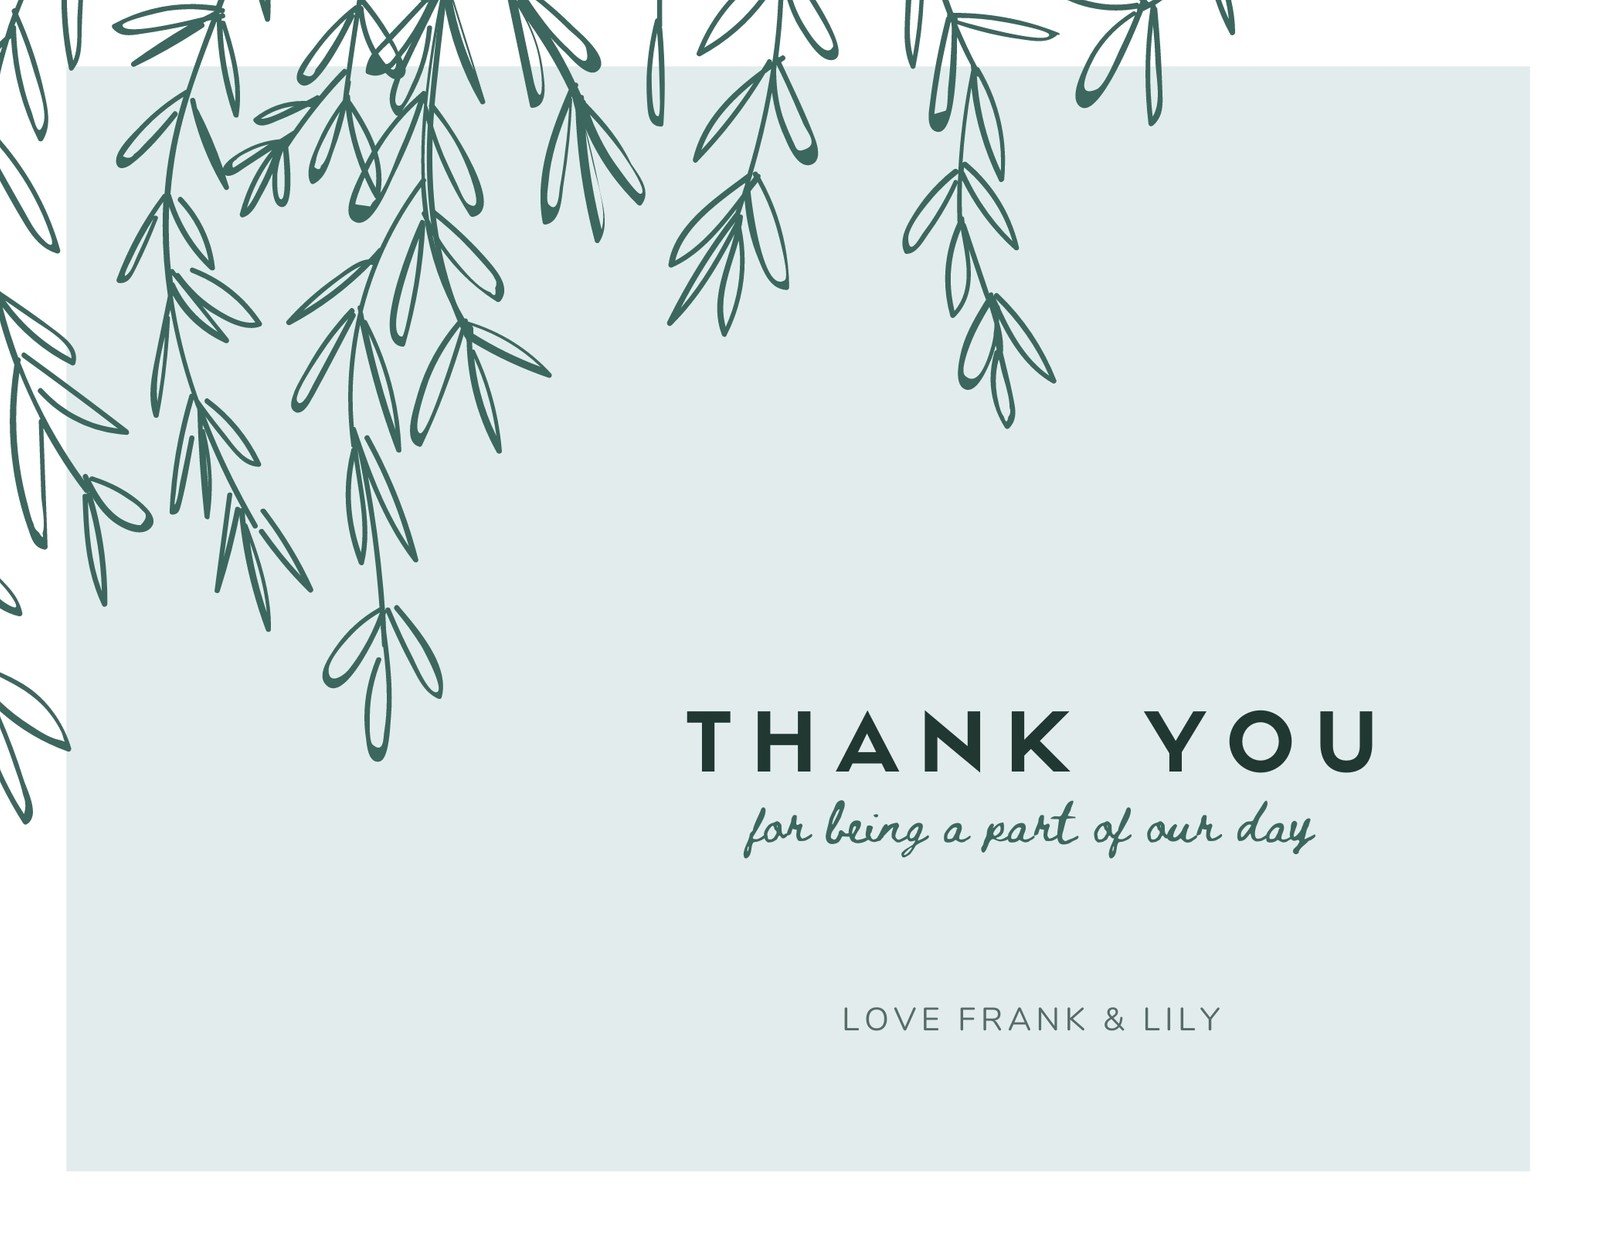 Green Vines Wedding Thank You Card - Templates by Canva Regarding Free Printable Thank You Card Template